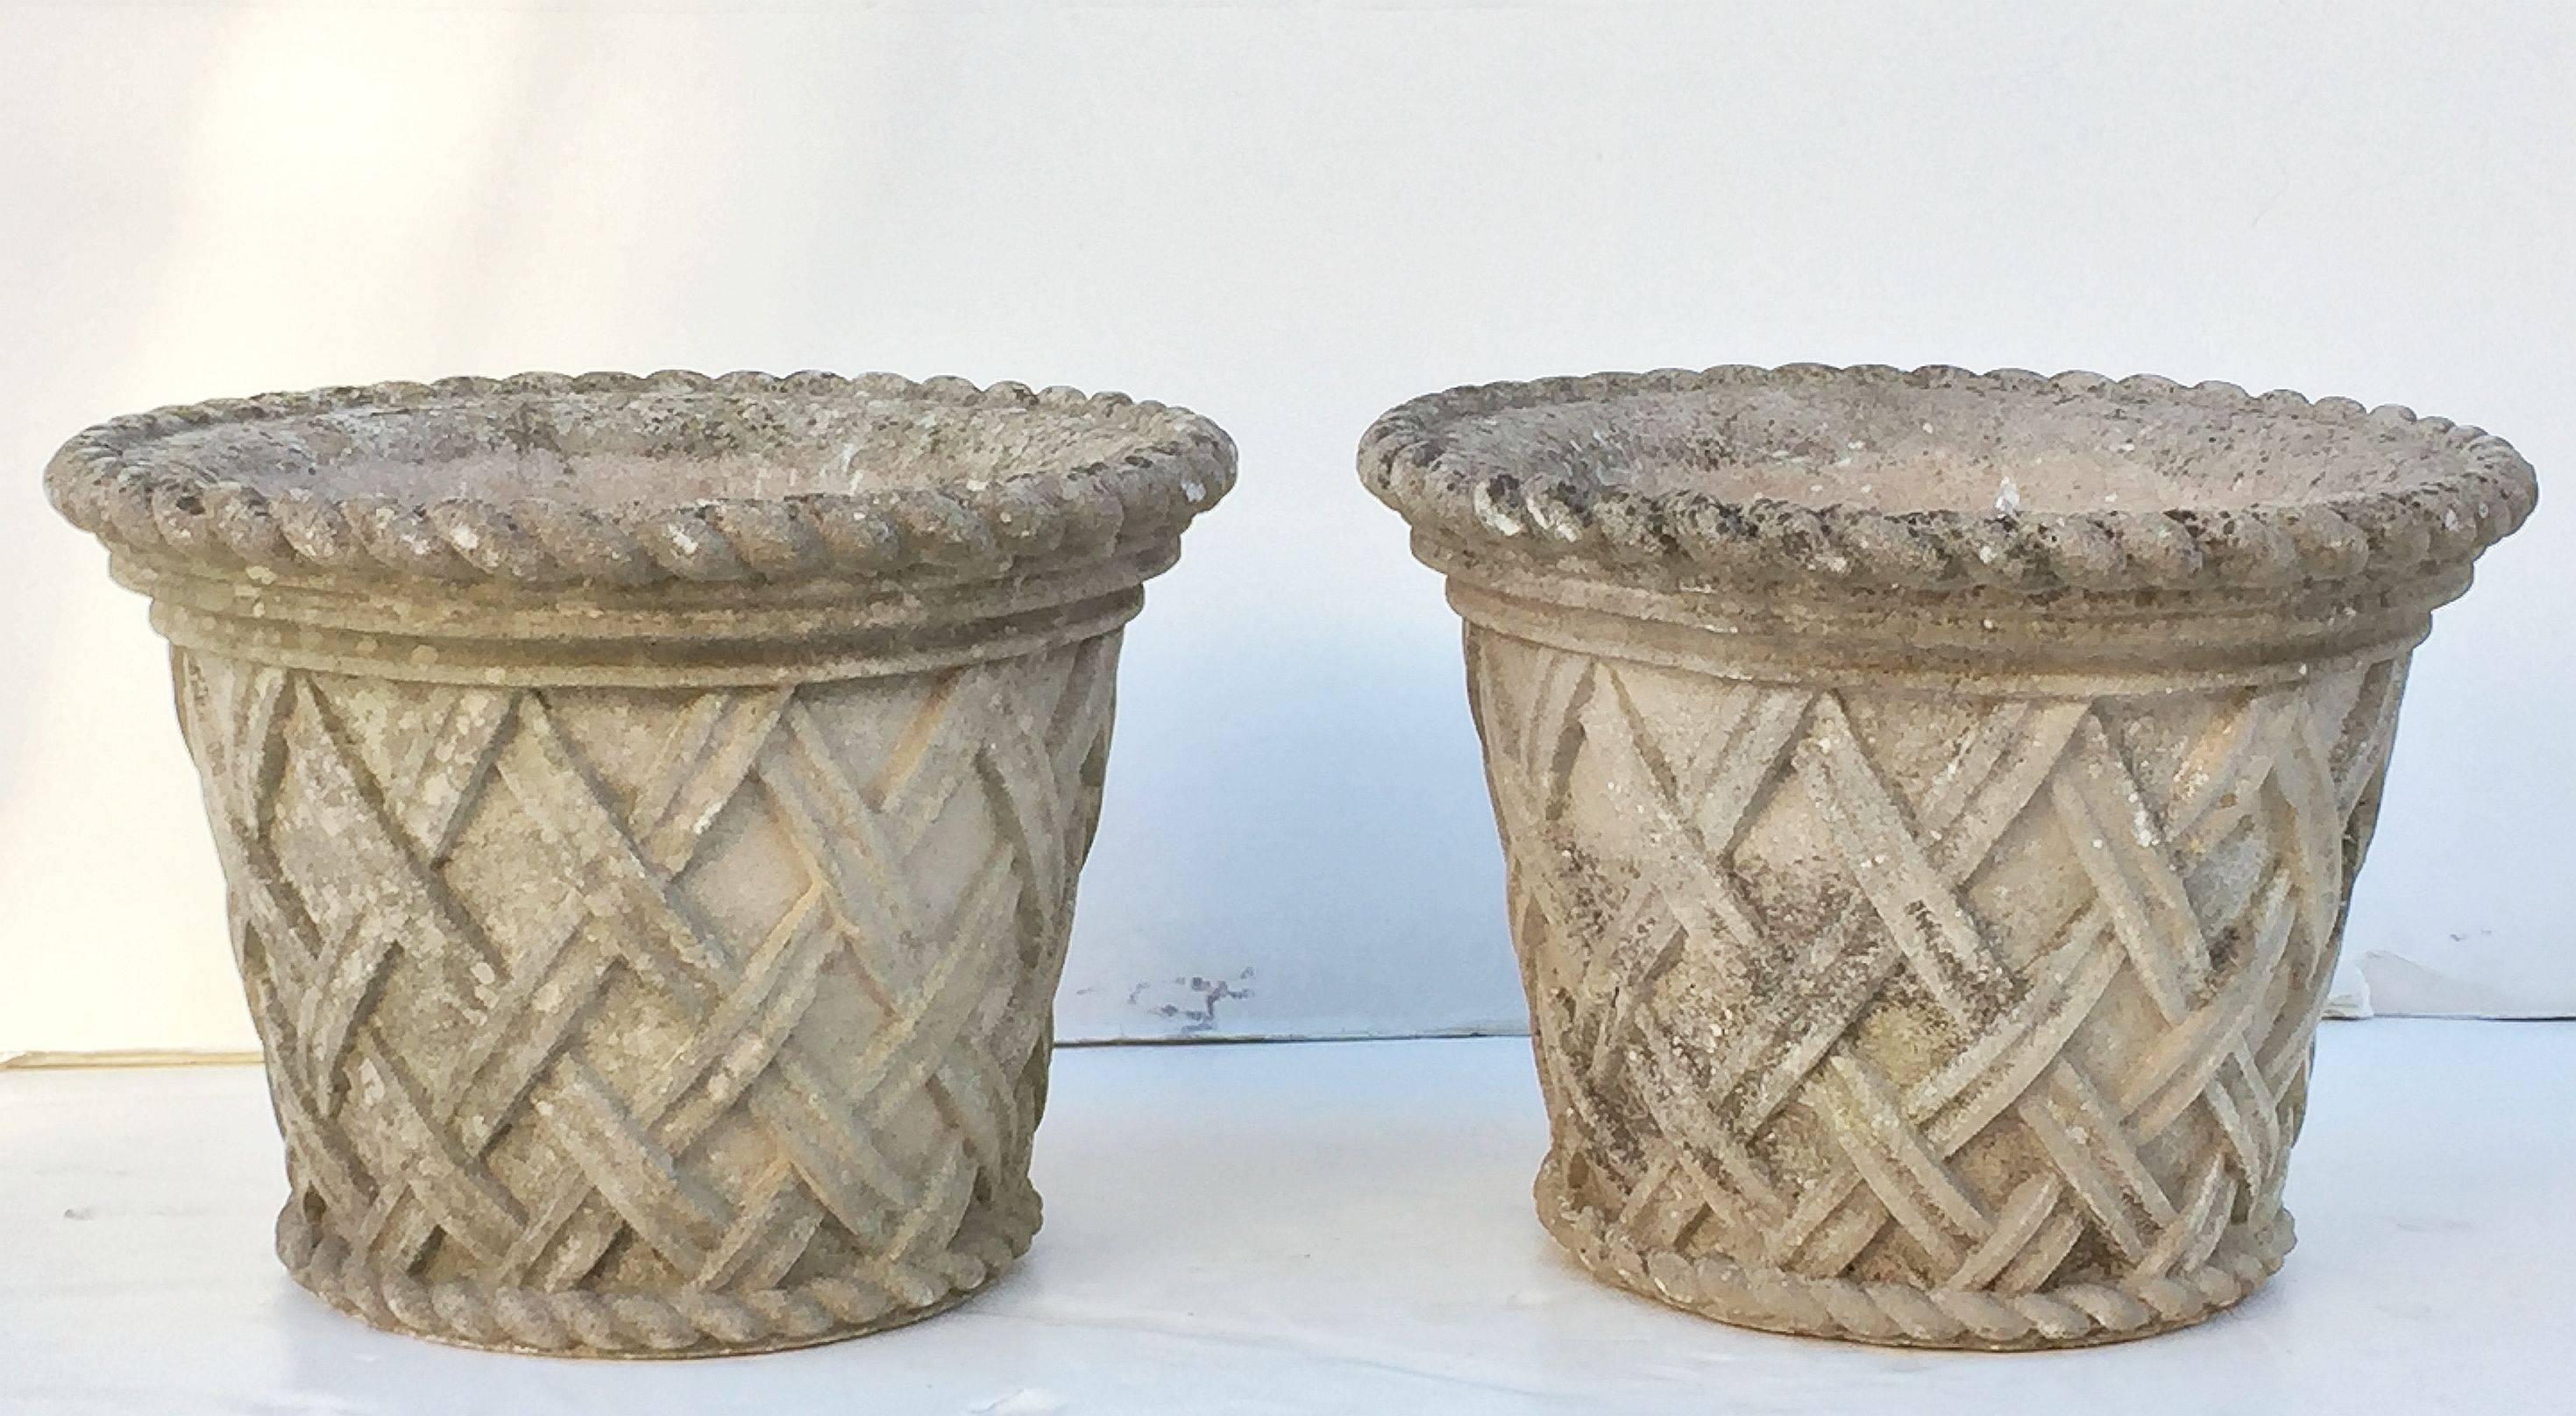 A pair of fine large English garden planters or (jardiniere) urns of composition stone, each 21